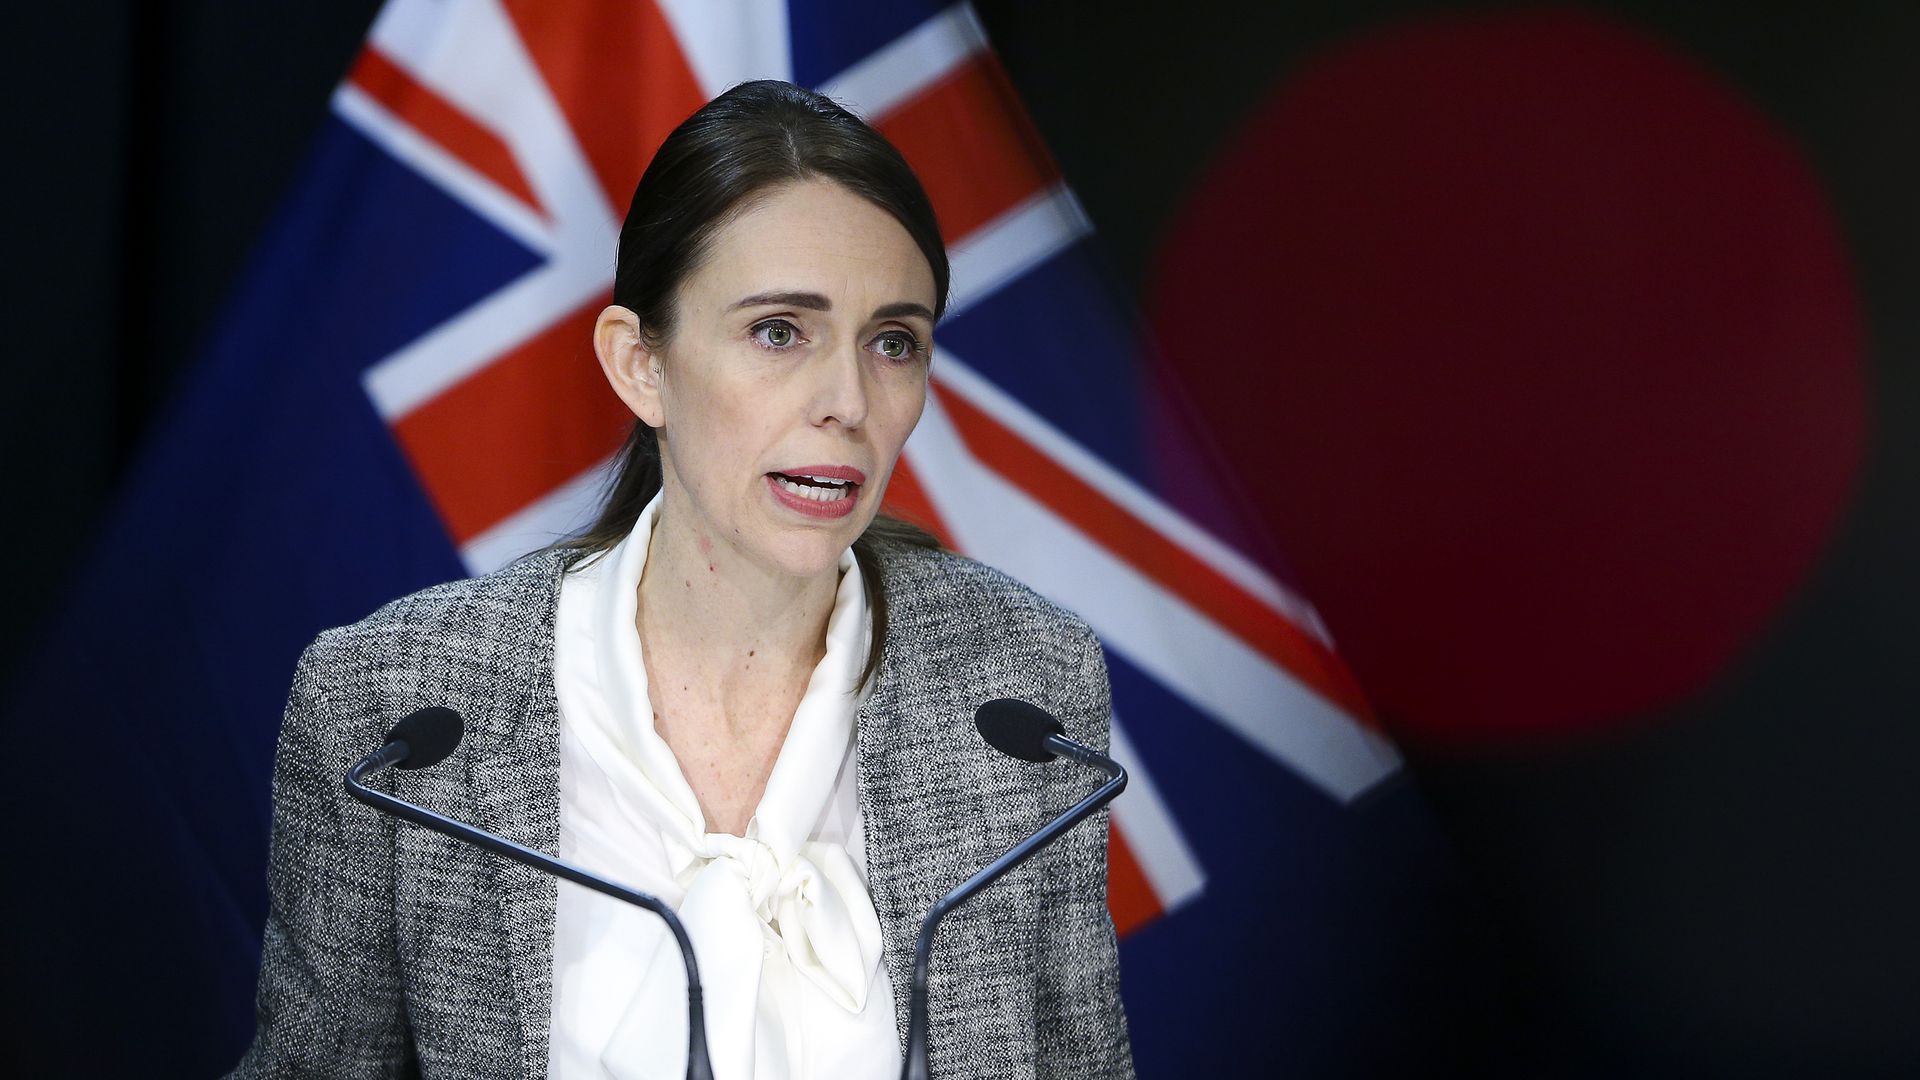  Prime Minister Jacinda Ardern speaks to media during a press conference at Parliament on June 17